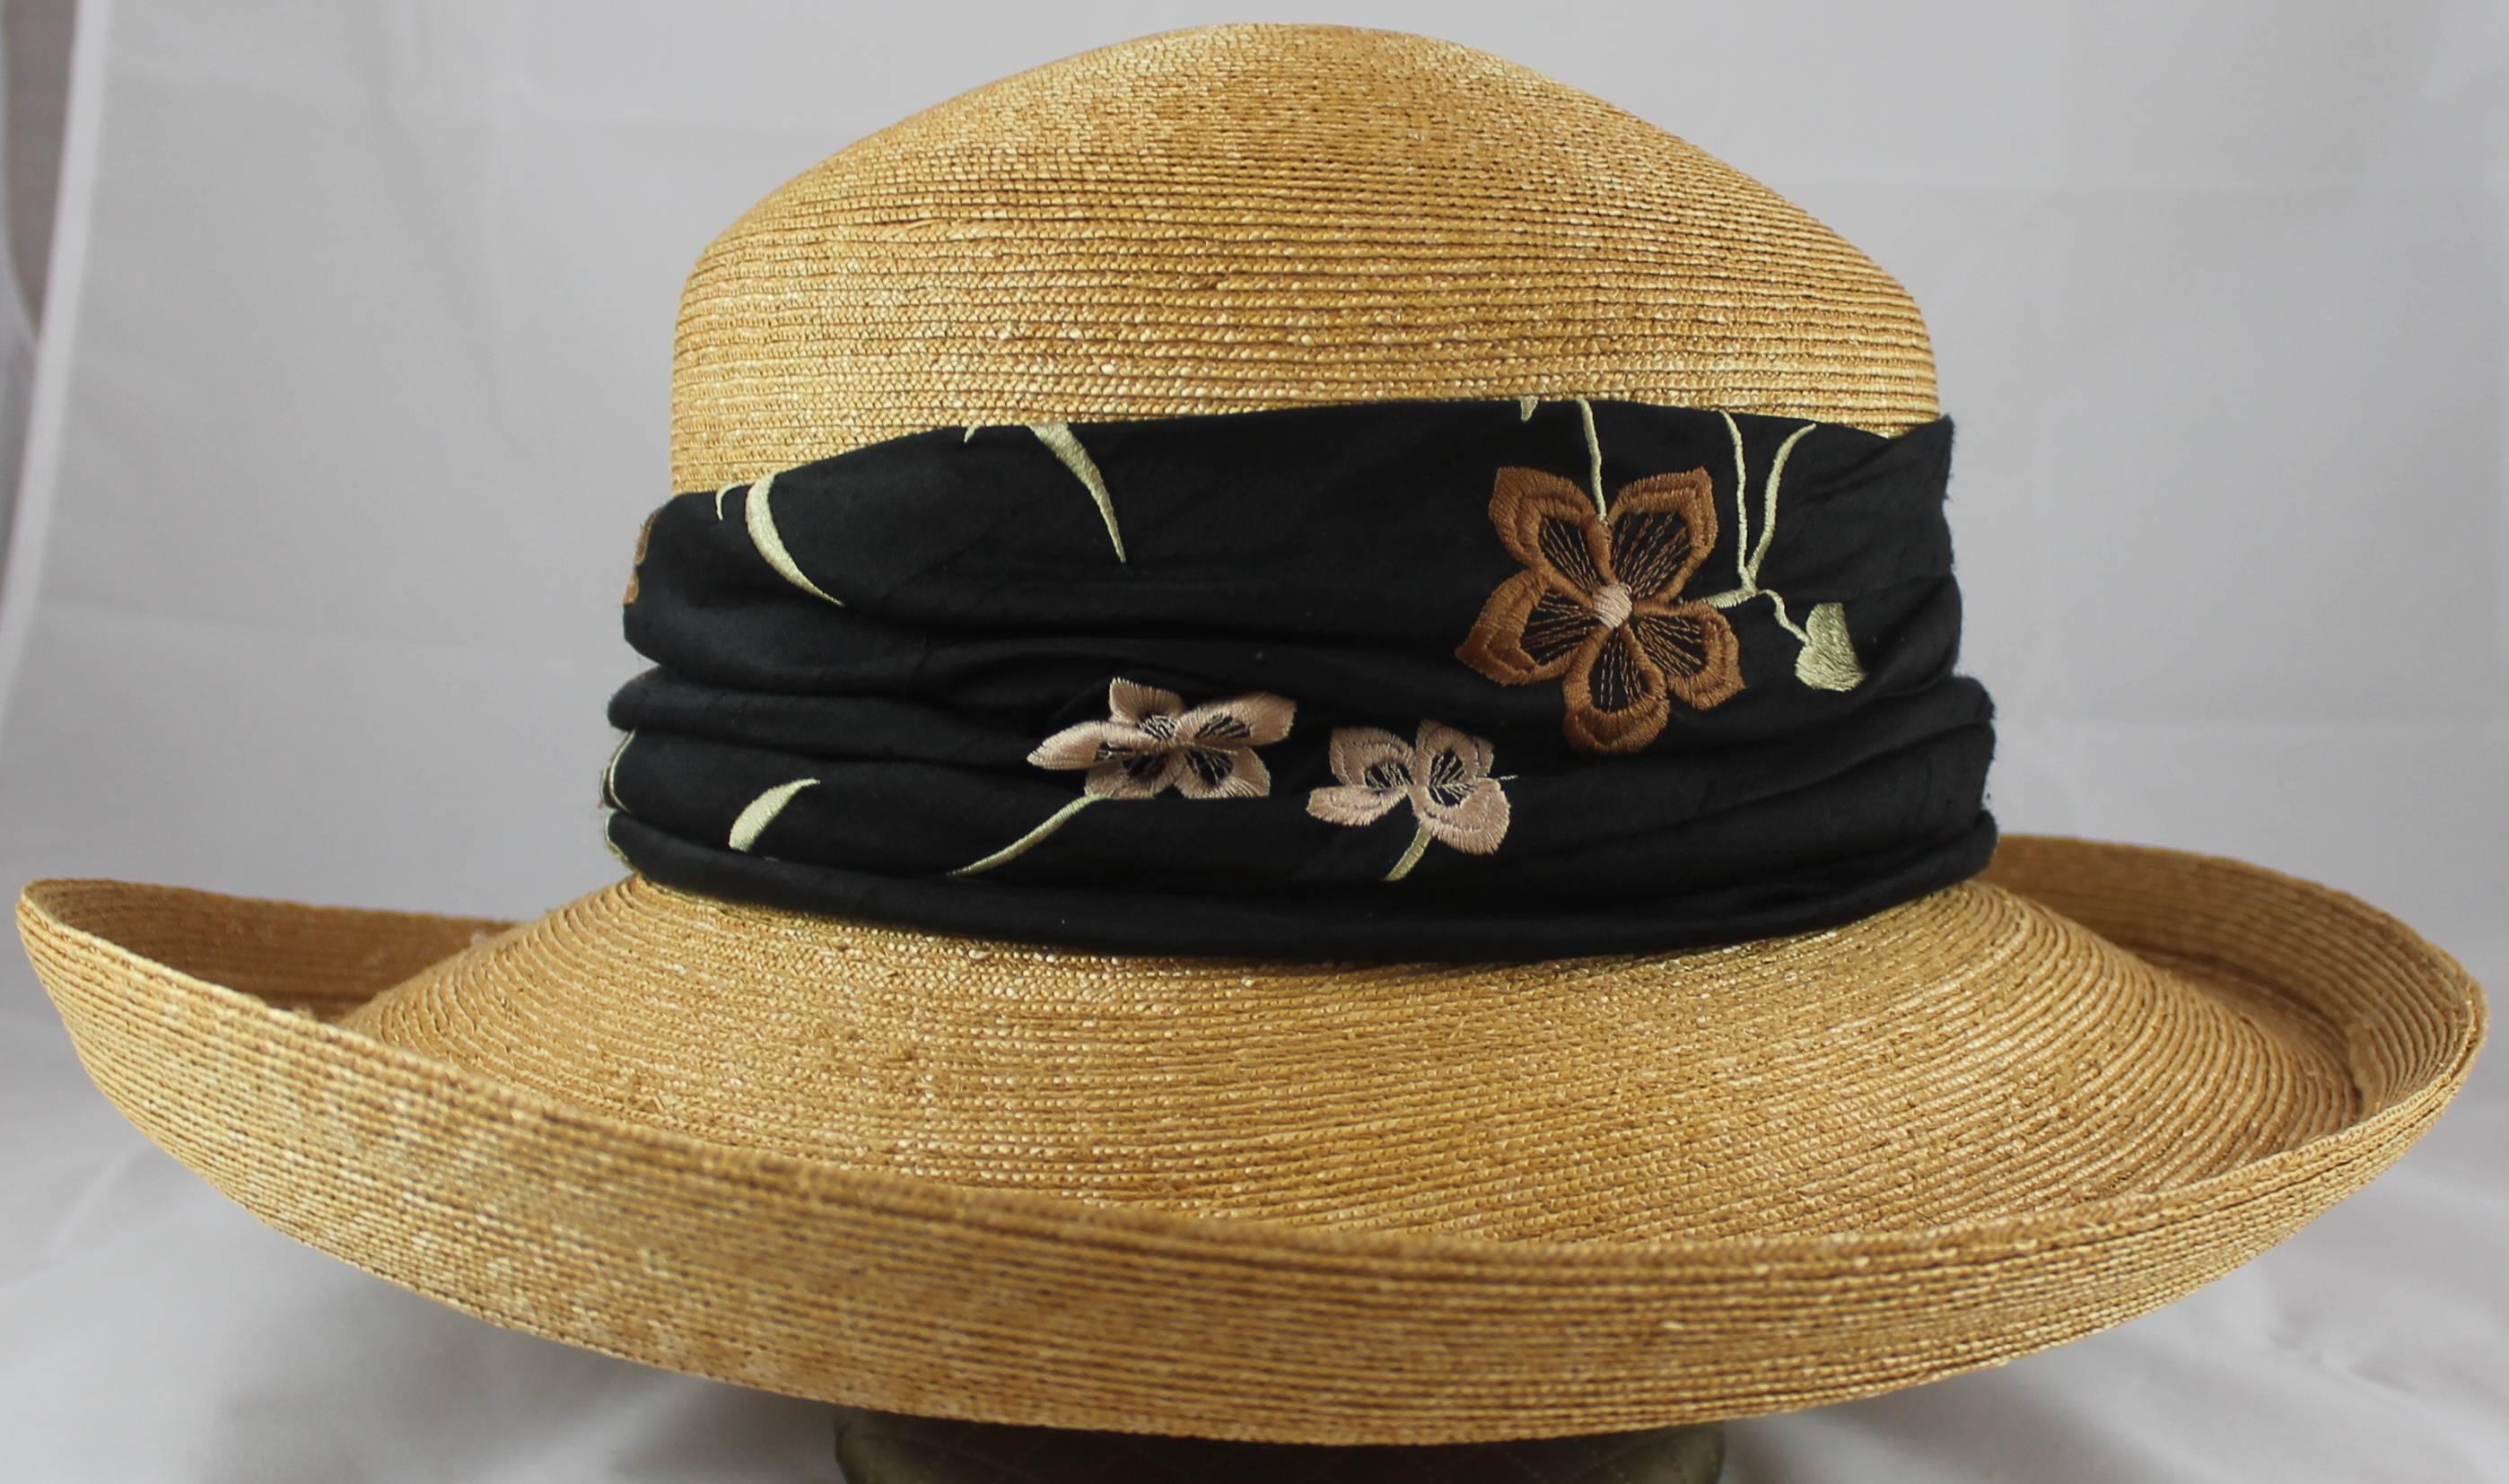 Suzanne Couture Millinery Tan Straw Hat with Black Floral Ribbon. This hat is in excellent condition and is perfect for summer time! The black ribbon has a stitched, floral design in earth tones. 

Measurements:
Brim- approximately